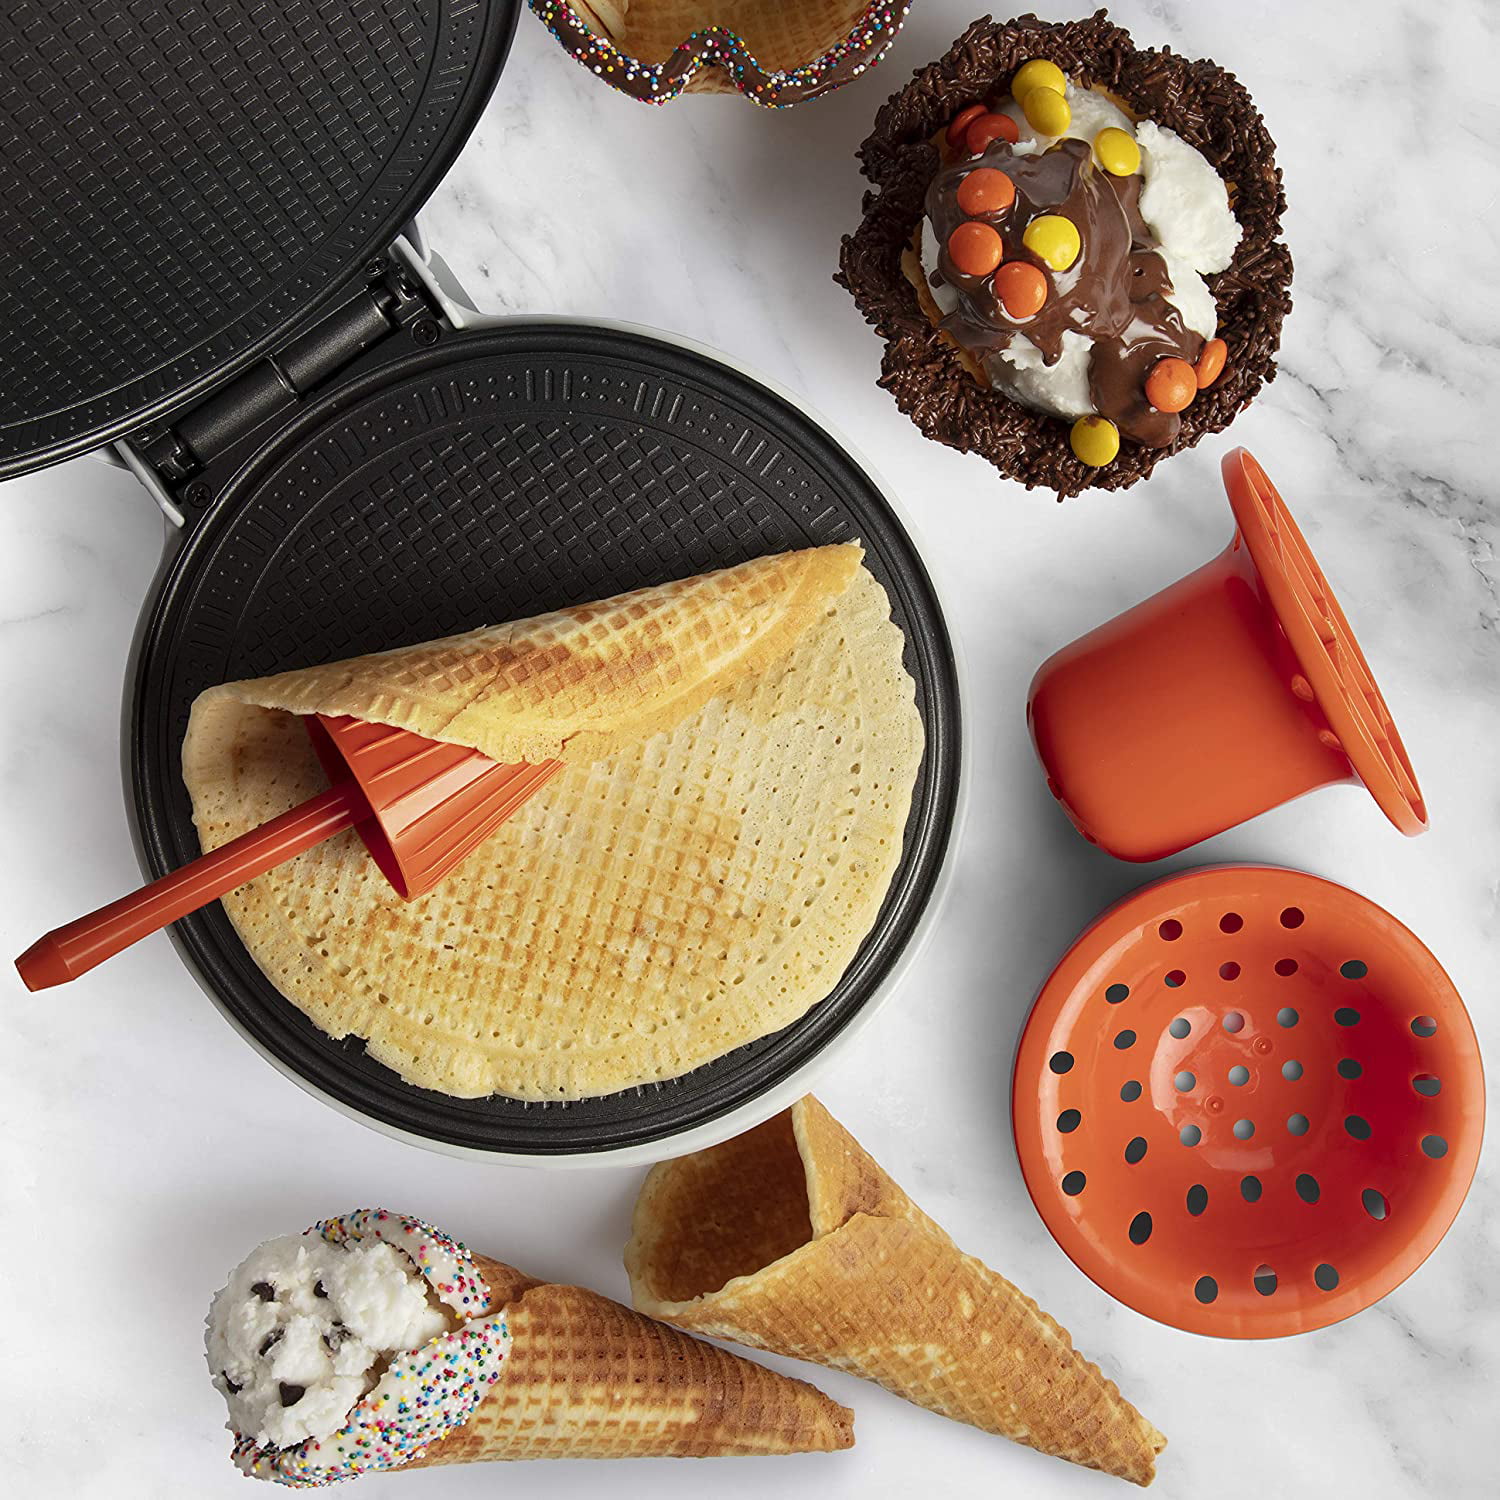 Chefmaster MasterChef Waffle Cone and Bowl Maker Includes Shaper Roller and Bowl Press Fun Kitchen Appliance for Summer Parties & Gift Giving Homemade Ice Cream Cone Baking Iron Machine